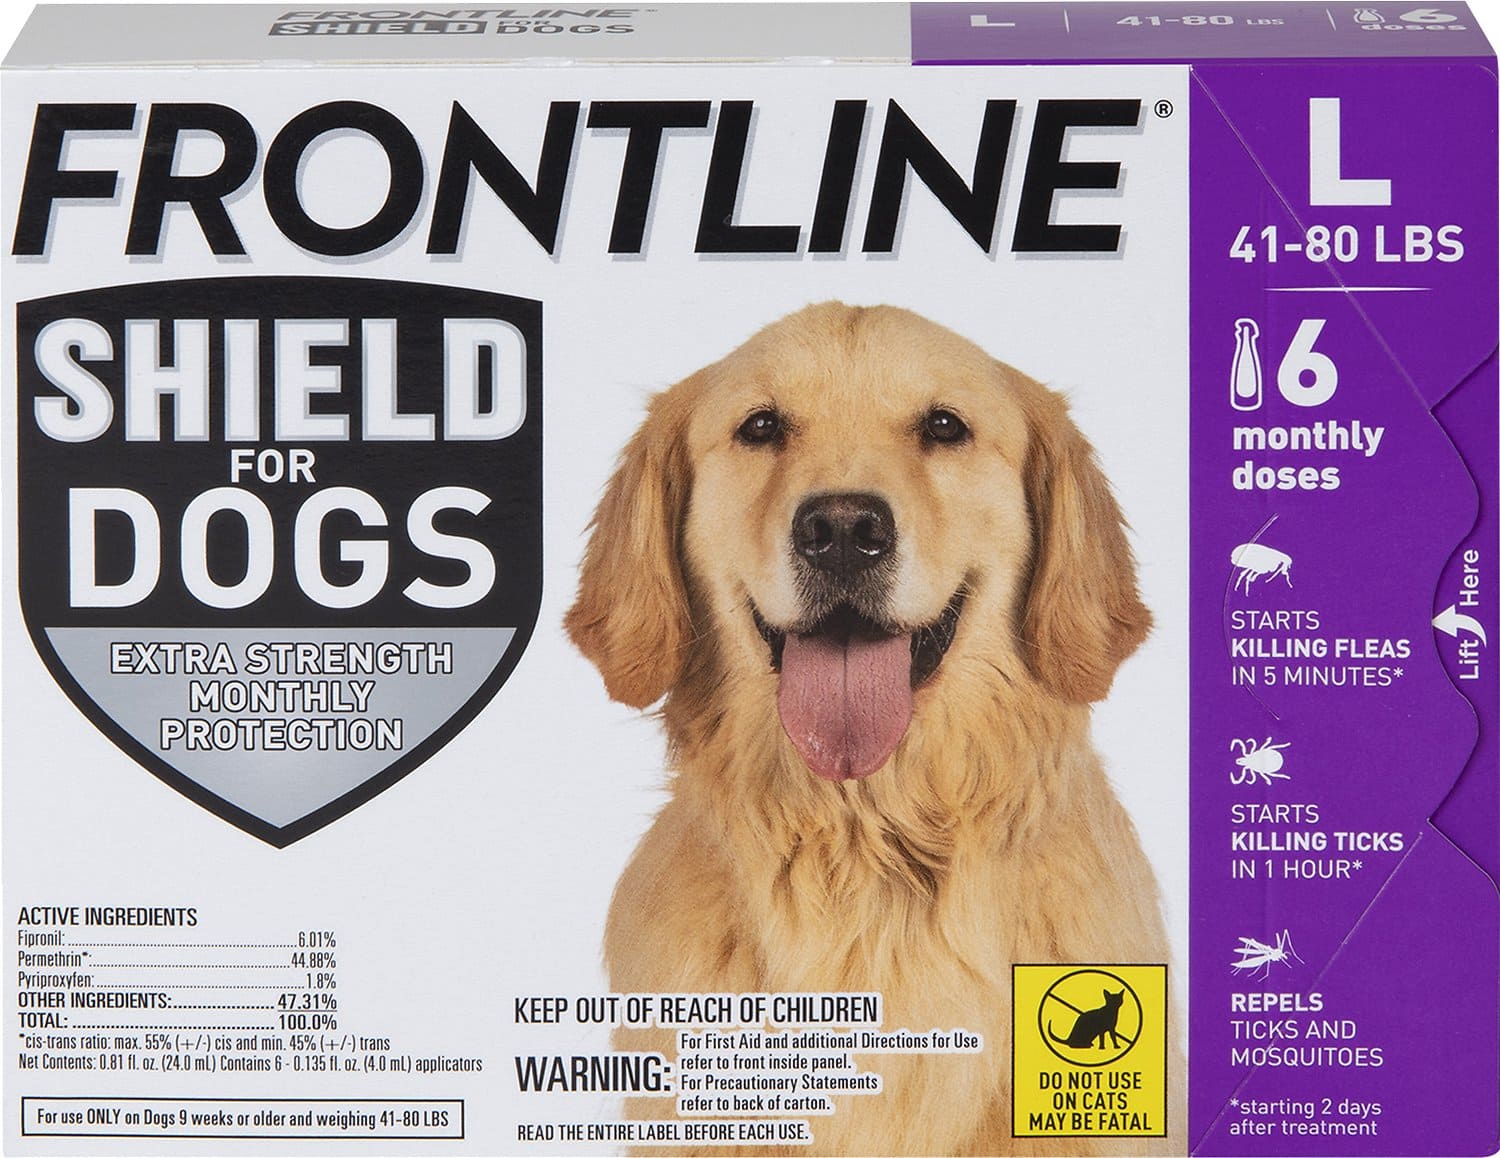 Frontline Shield 6 doses (6-month protection) for large dogs 41-80 lbs (Purple) 1